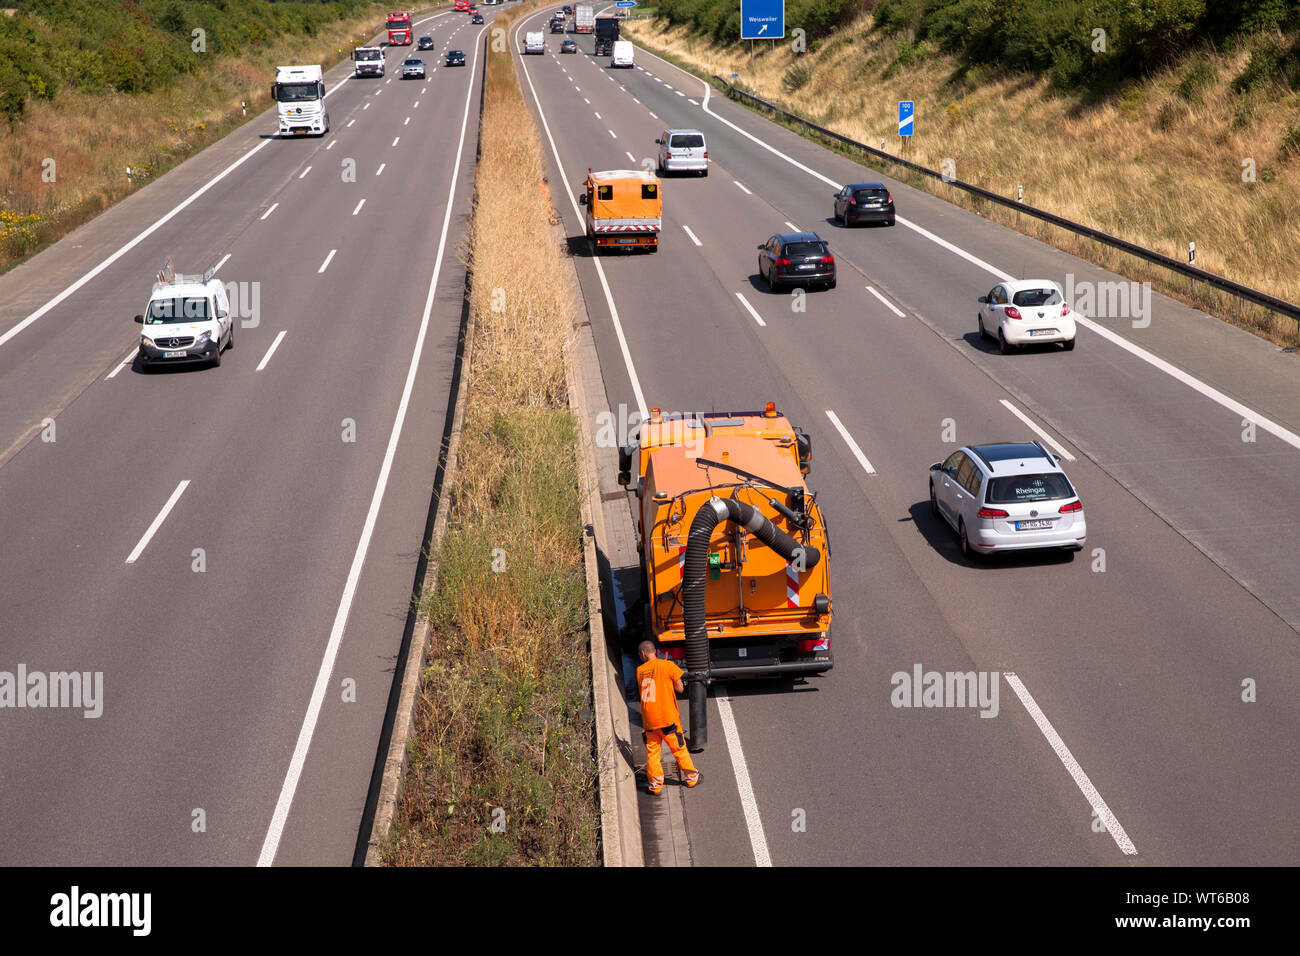 workers of the motorway maintenance authorities clean the inlet grids on Autobahn A4 in Eschweiler-Weisweiler, North Rhine-Westphalia, Germany.  Arbei Stock Photo